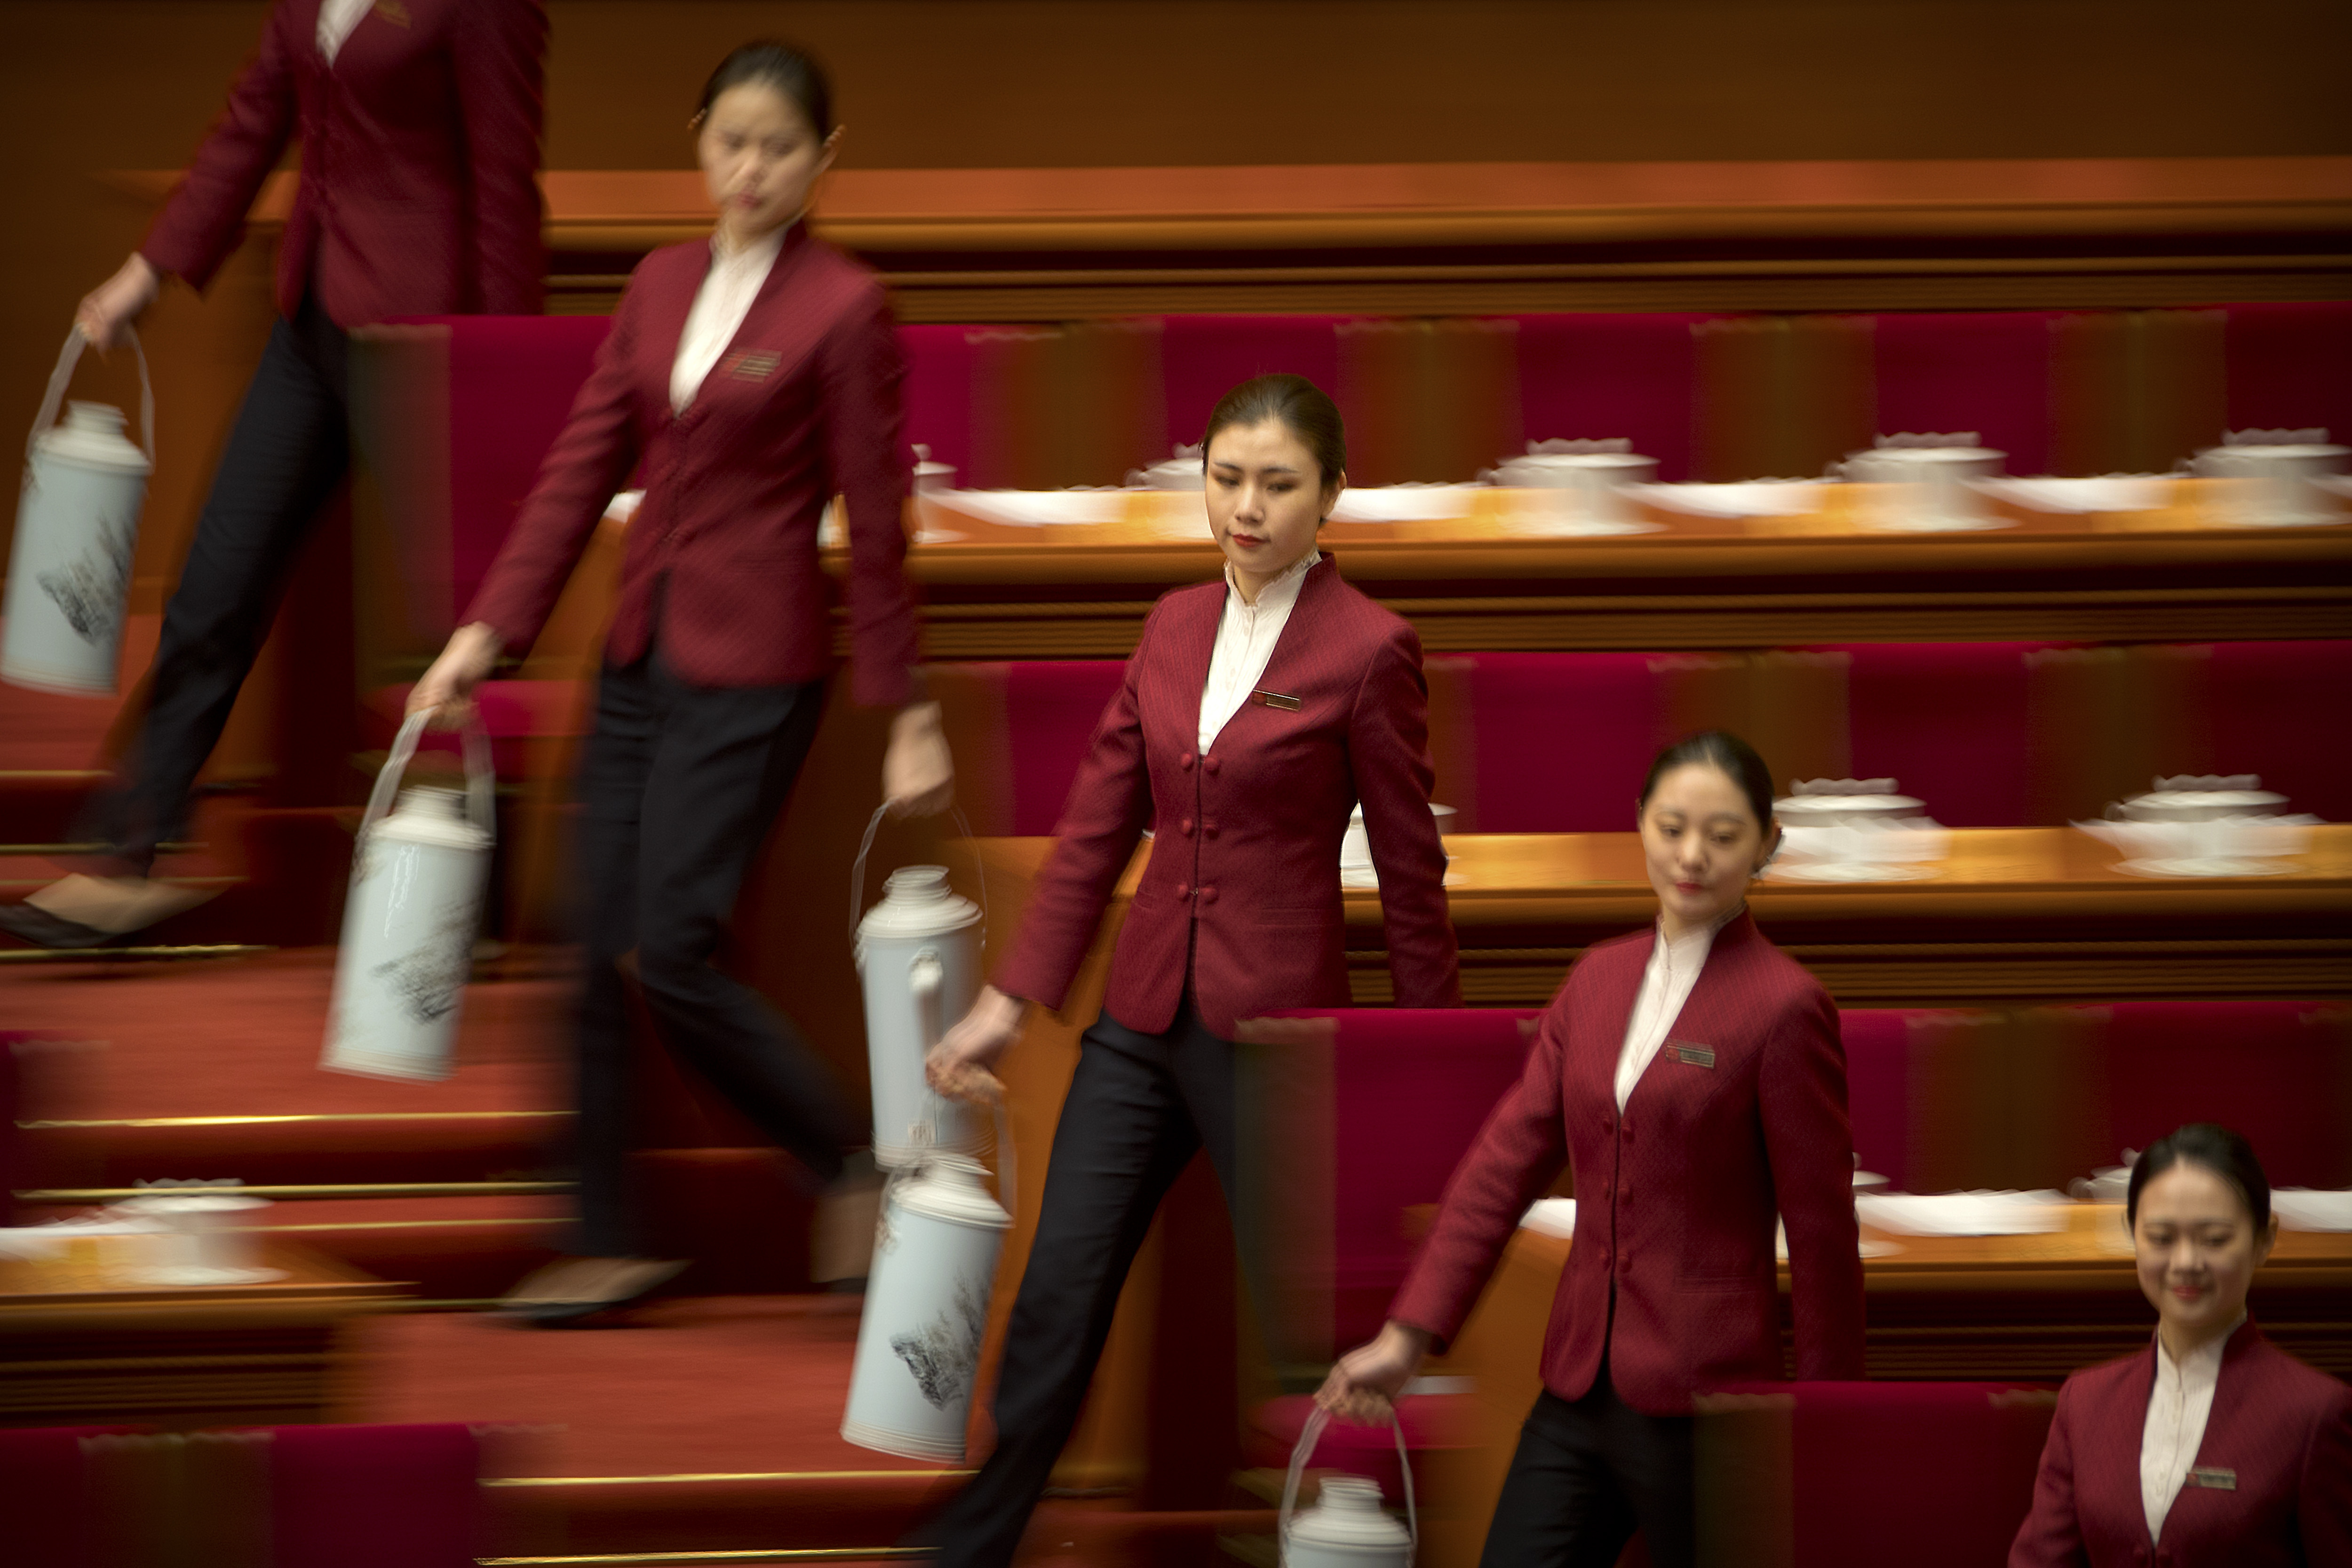 Hostesses carry flasks of water to fill teacups for delegates before the closing session of the Chinese People's Political Consultative Conference (CPPCC) at the Great Hall of the People in Beijing, Wednesday, March 13, 2019. (AP Photo/Mark Schiefelbein)